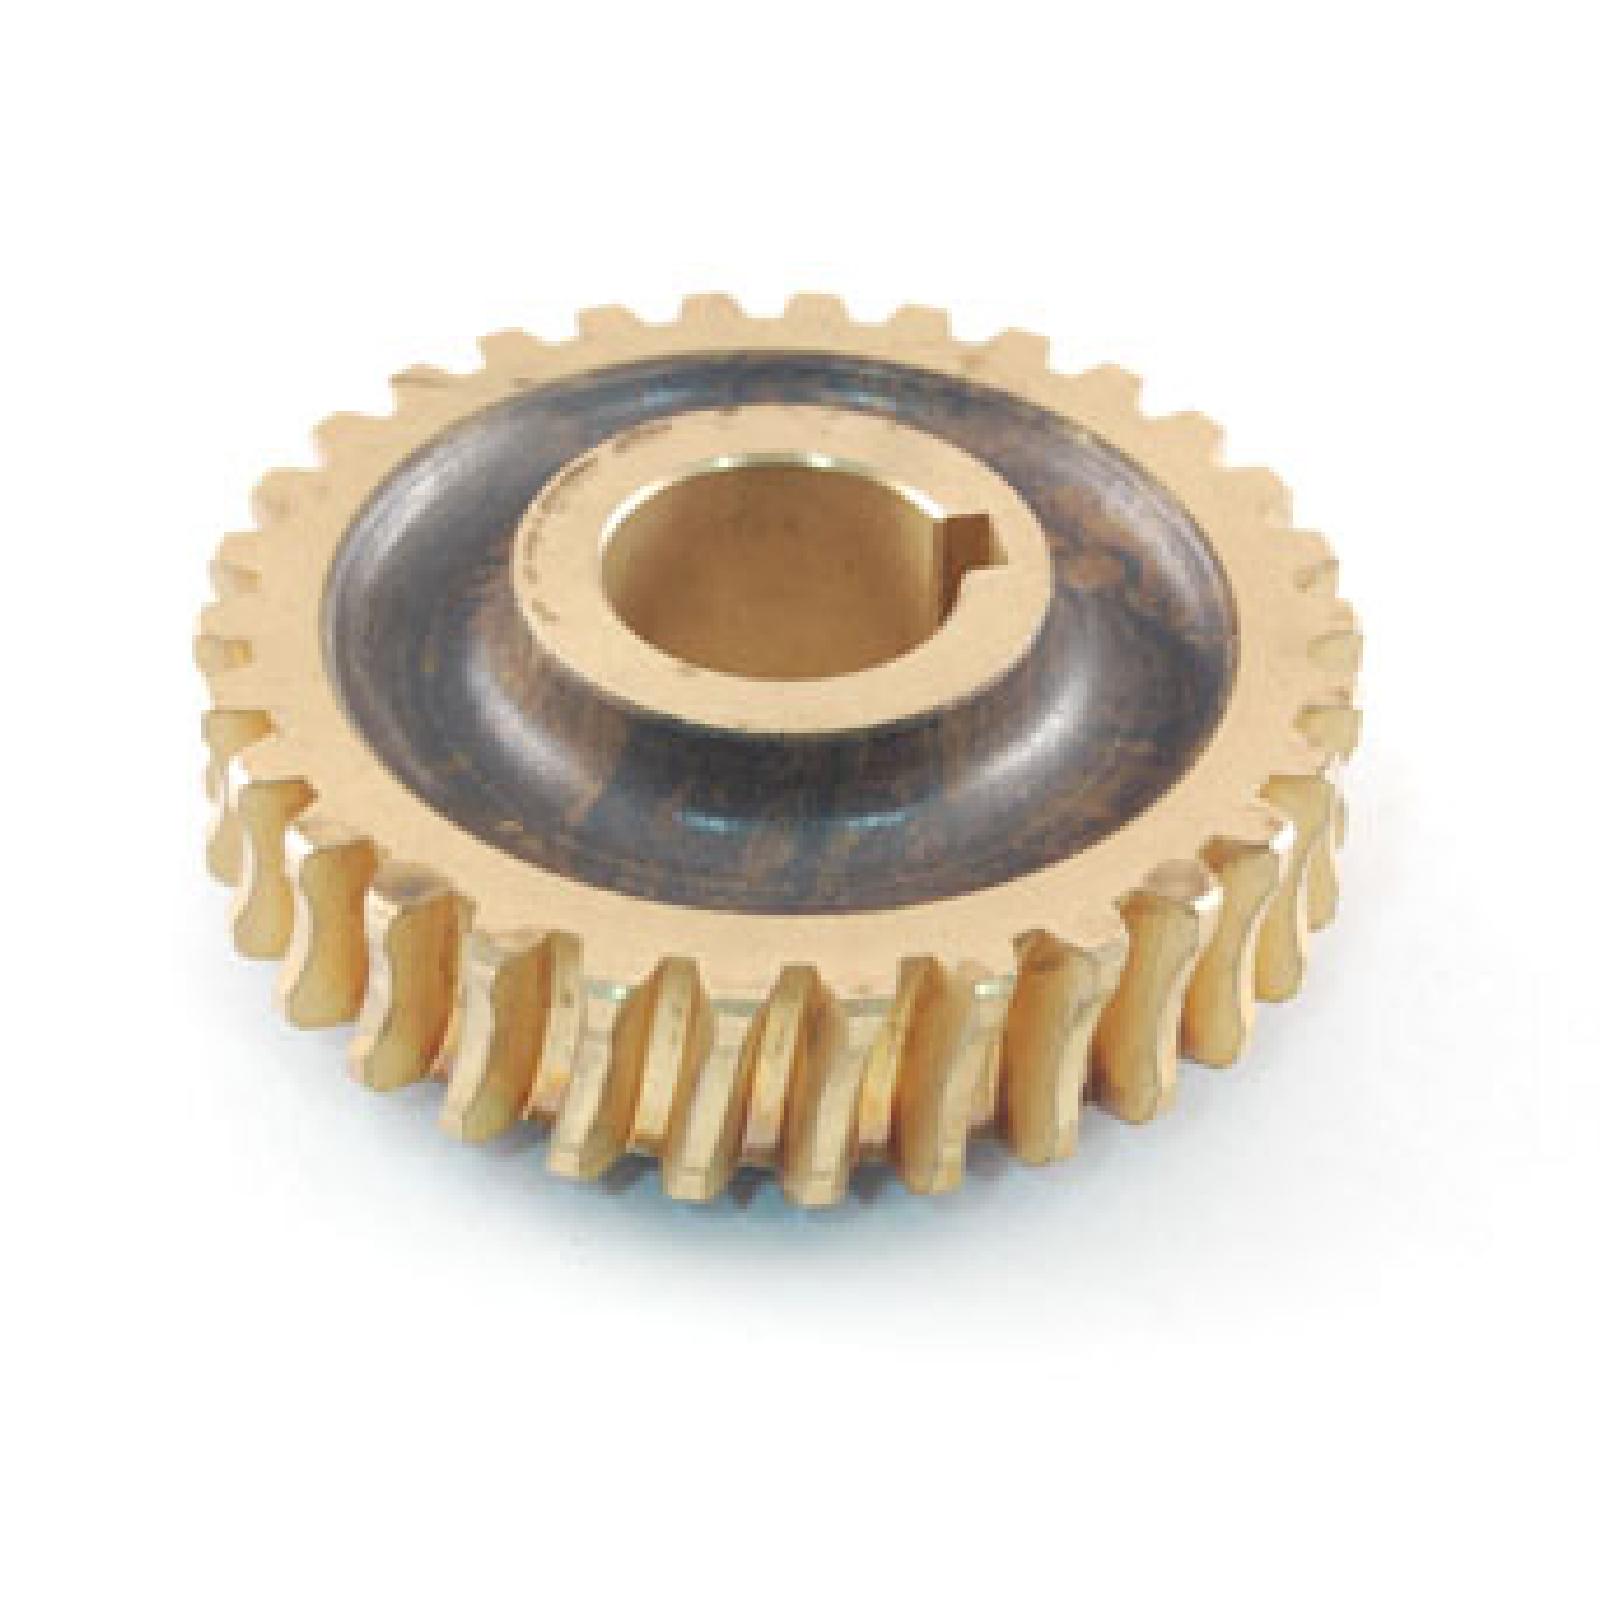 GEAR WORM part# 1901976 by MTD - Click Image to Close